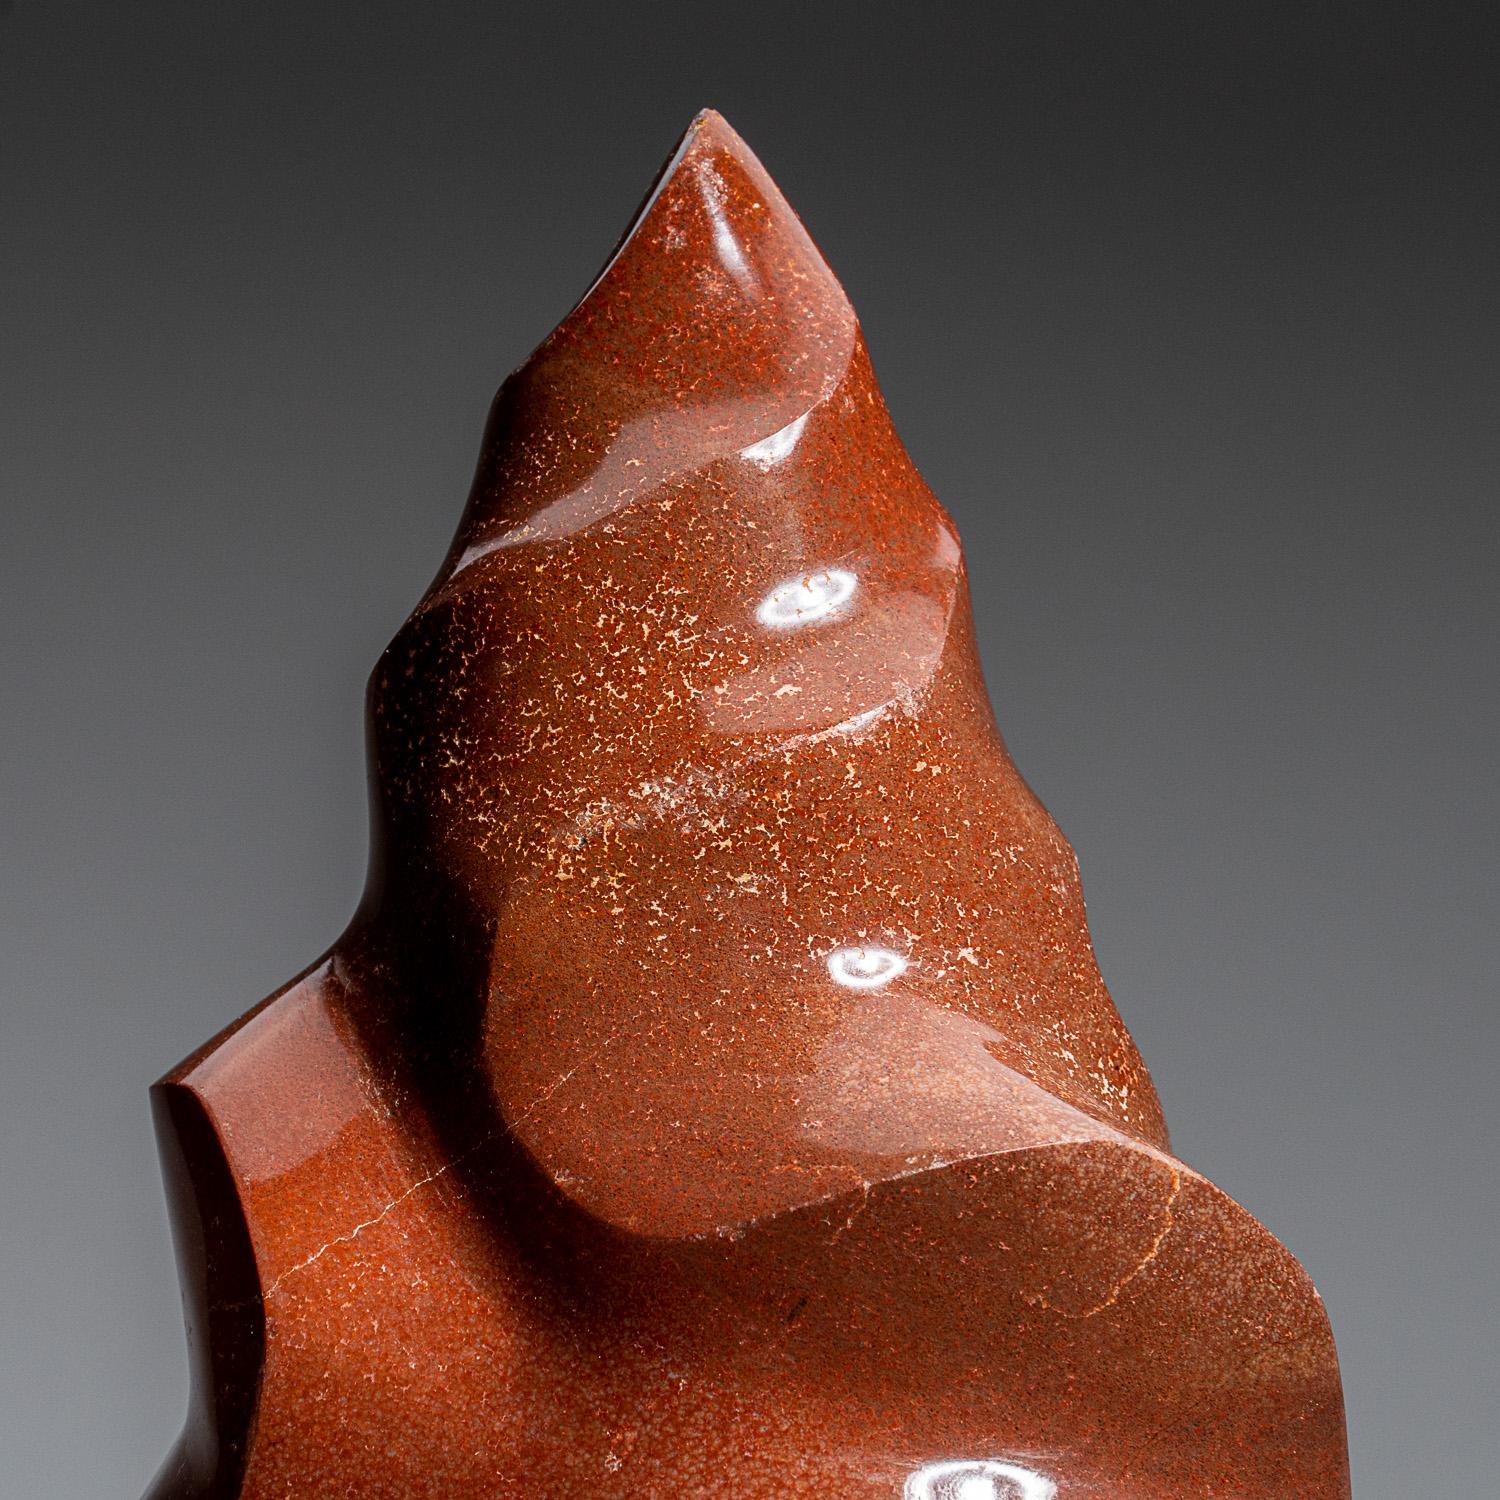 This top quality, hand polished Red Jasper flame freeform from Madagascar features a deep red coloring ranging from bright to brownish-red. Red Jasper is renowned for its ability to relieve anxiety, regulate emotional frustrations, and impart